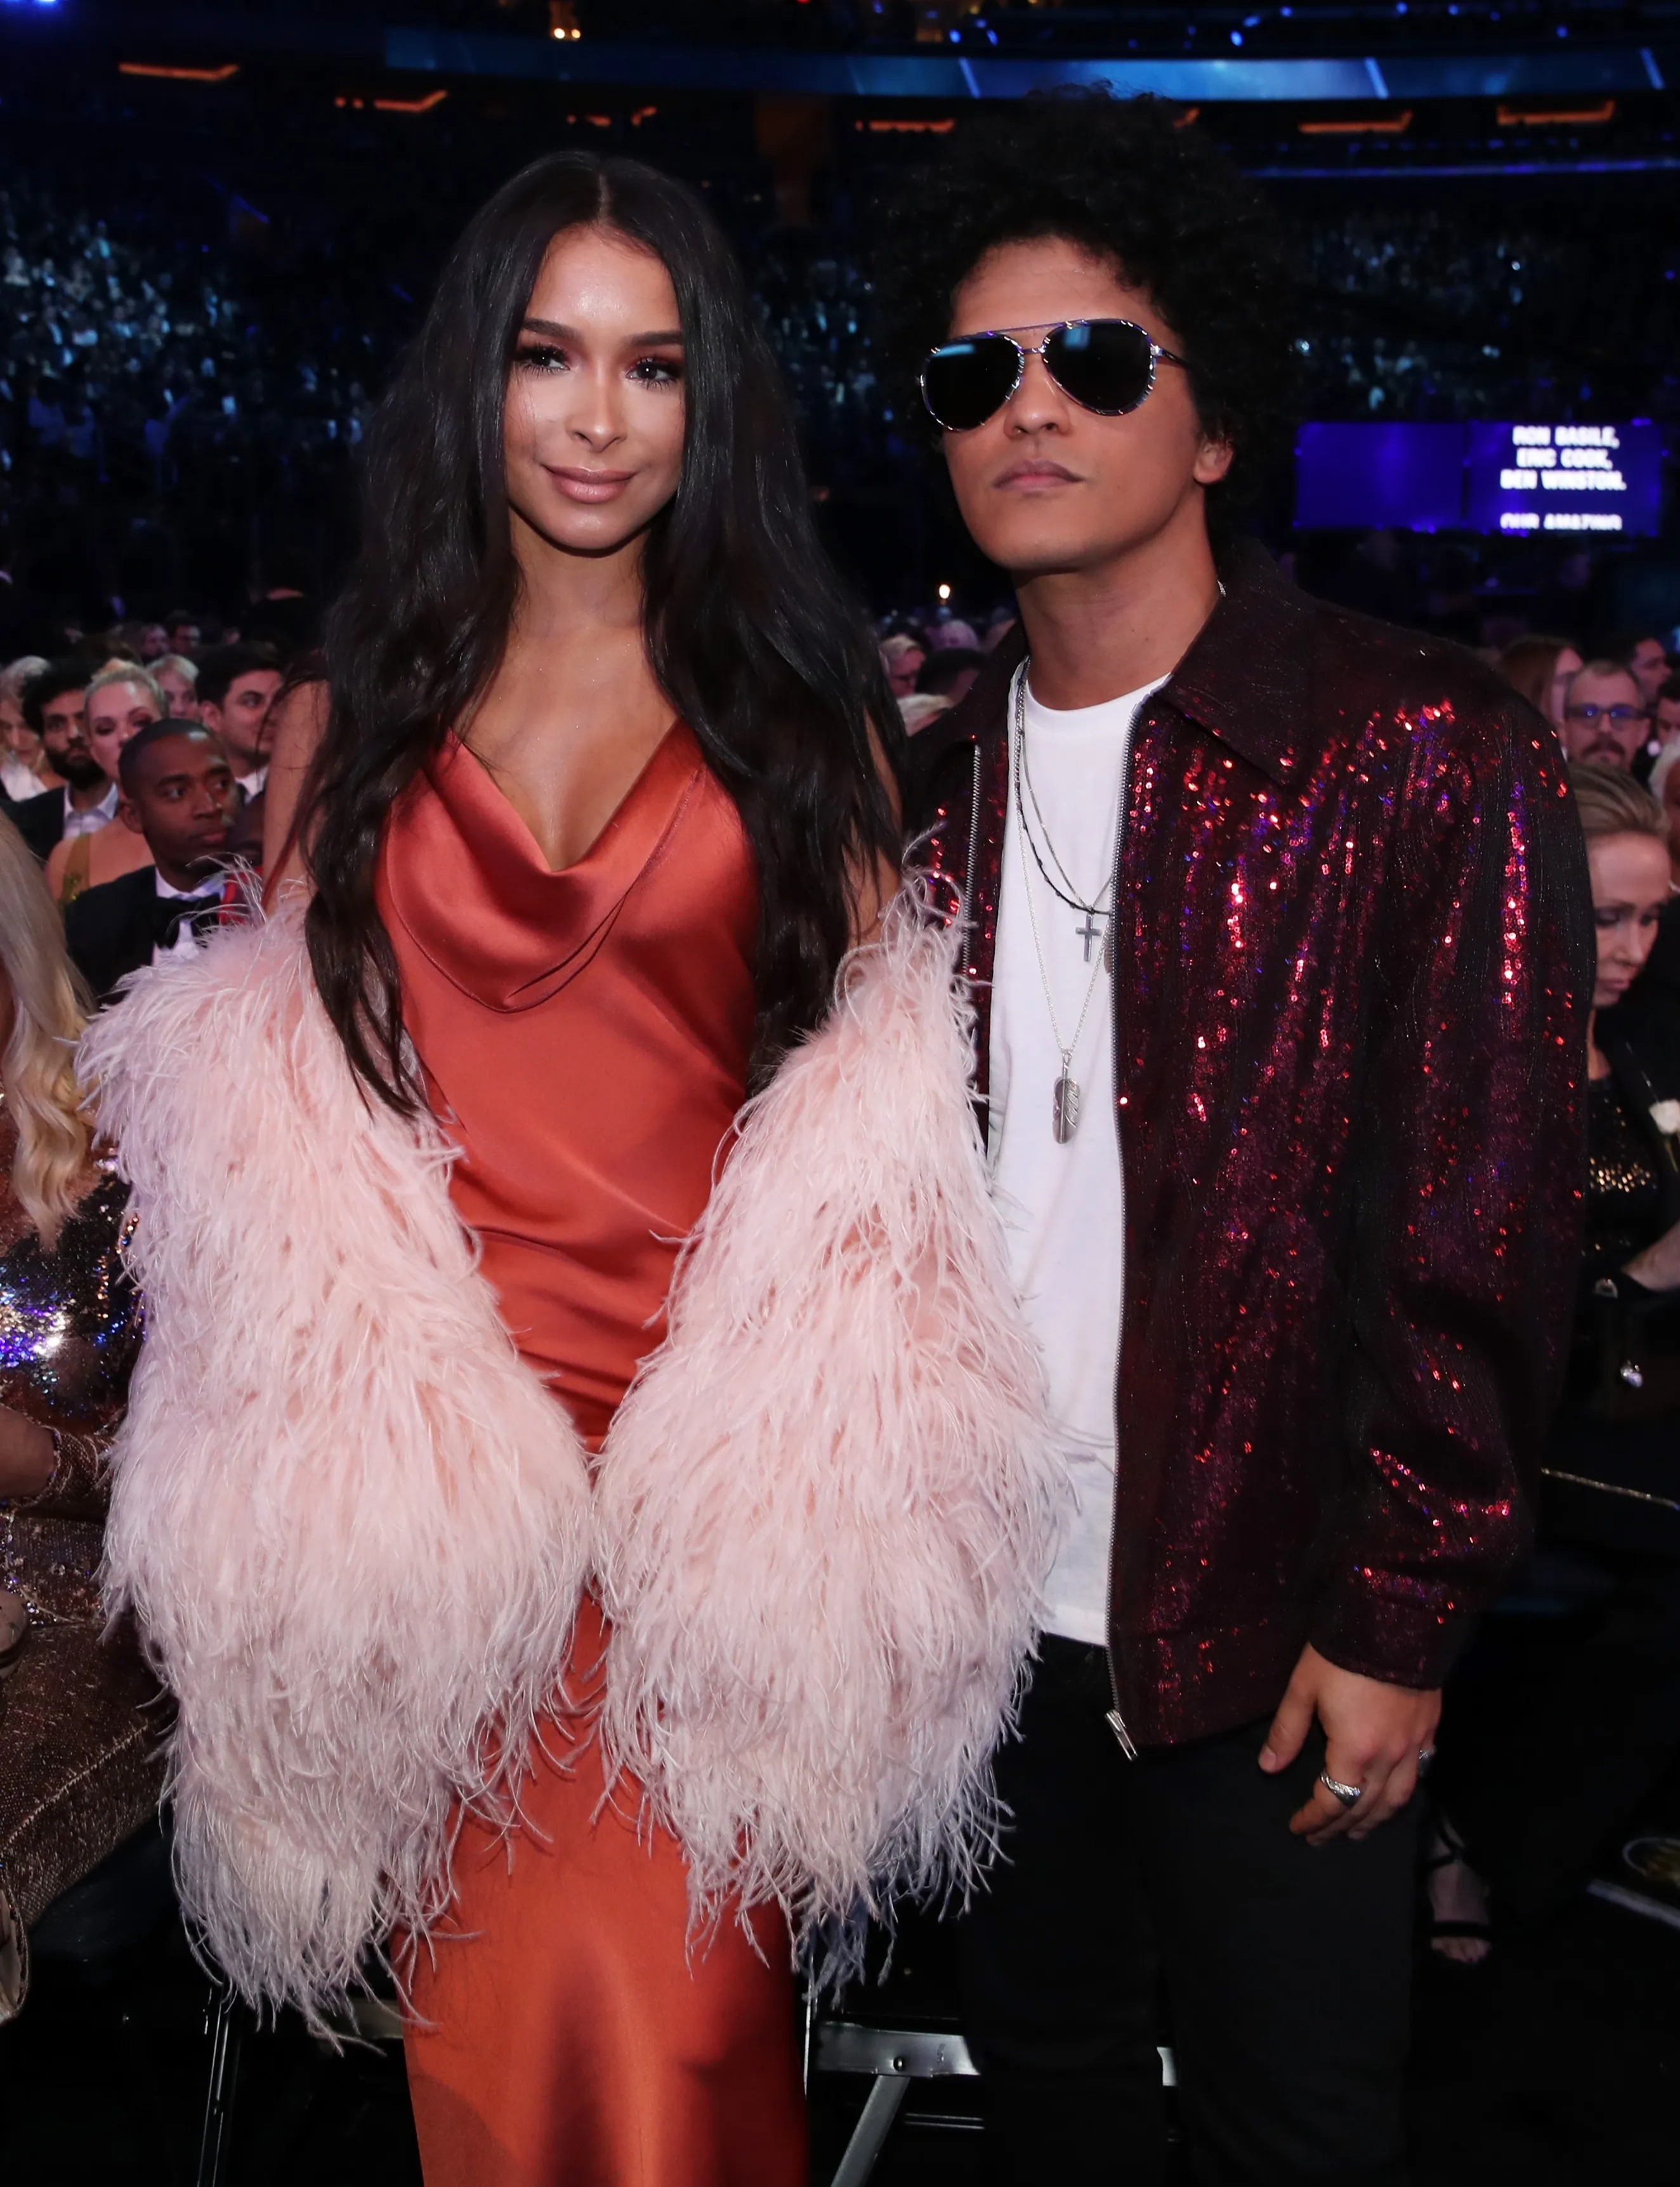 Bruno's close friend said he and his partner are suffering relationship issues